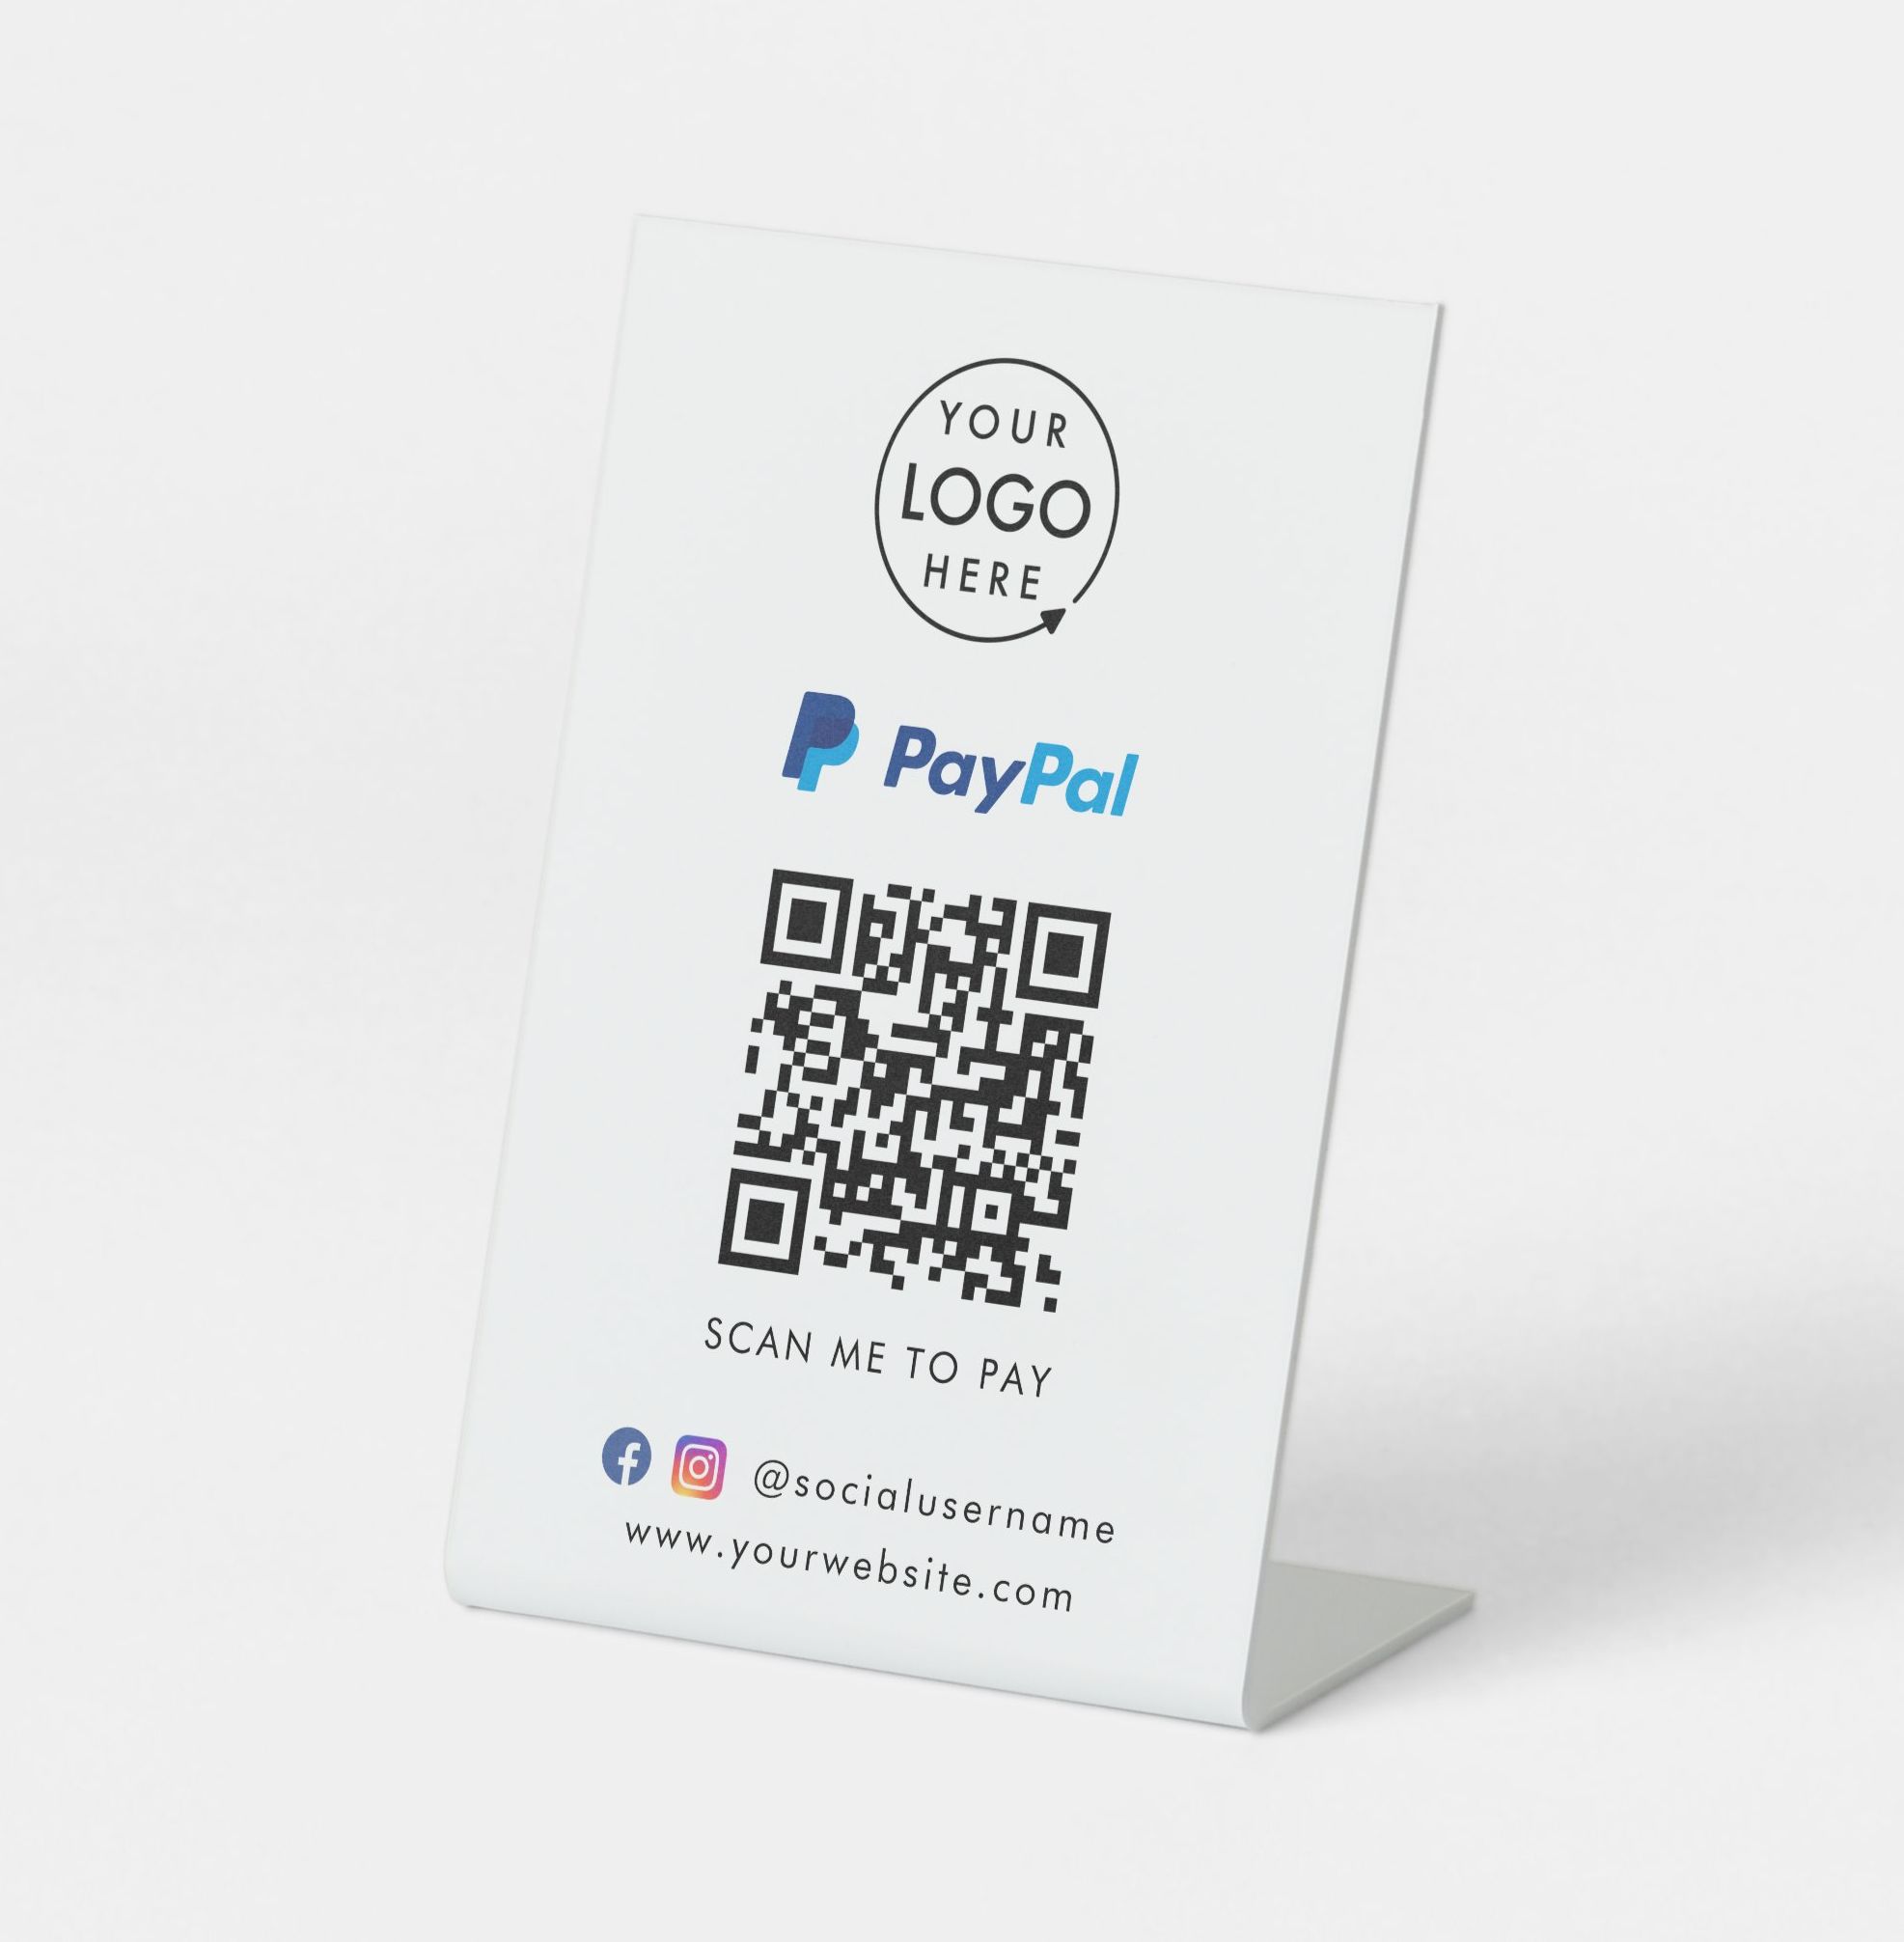 Paypal QR Code Payment | Scan to Pay Business Logo Pedestal Sign